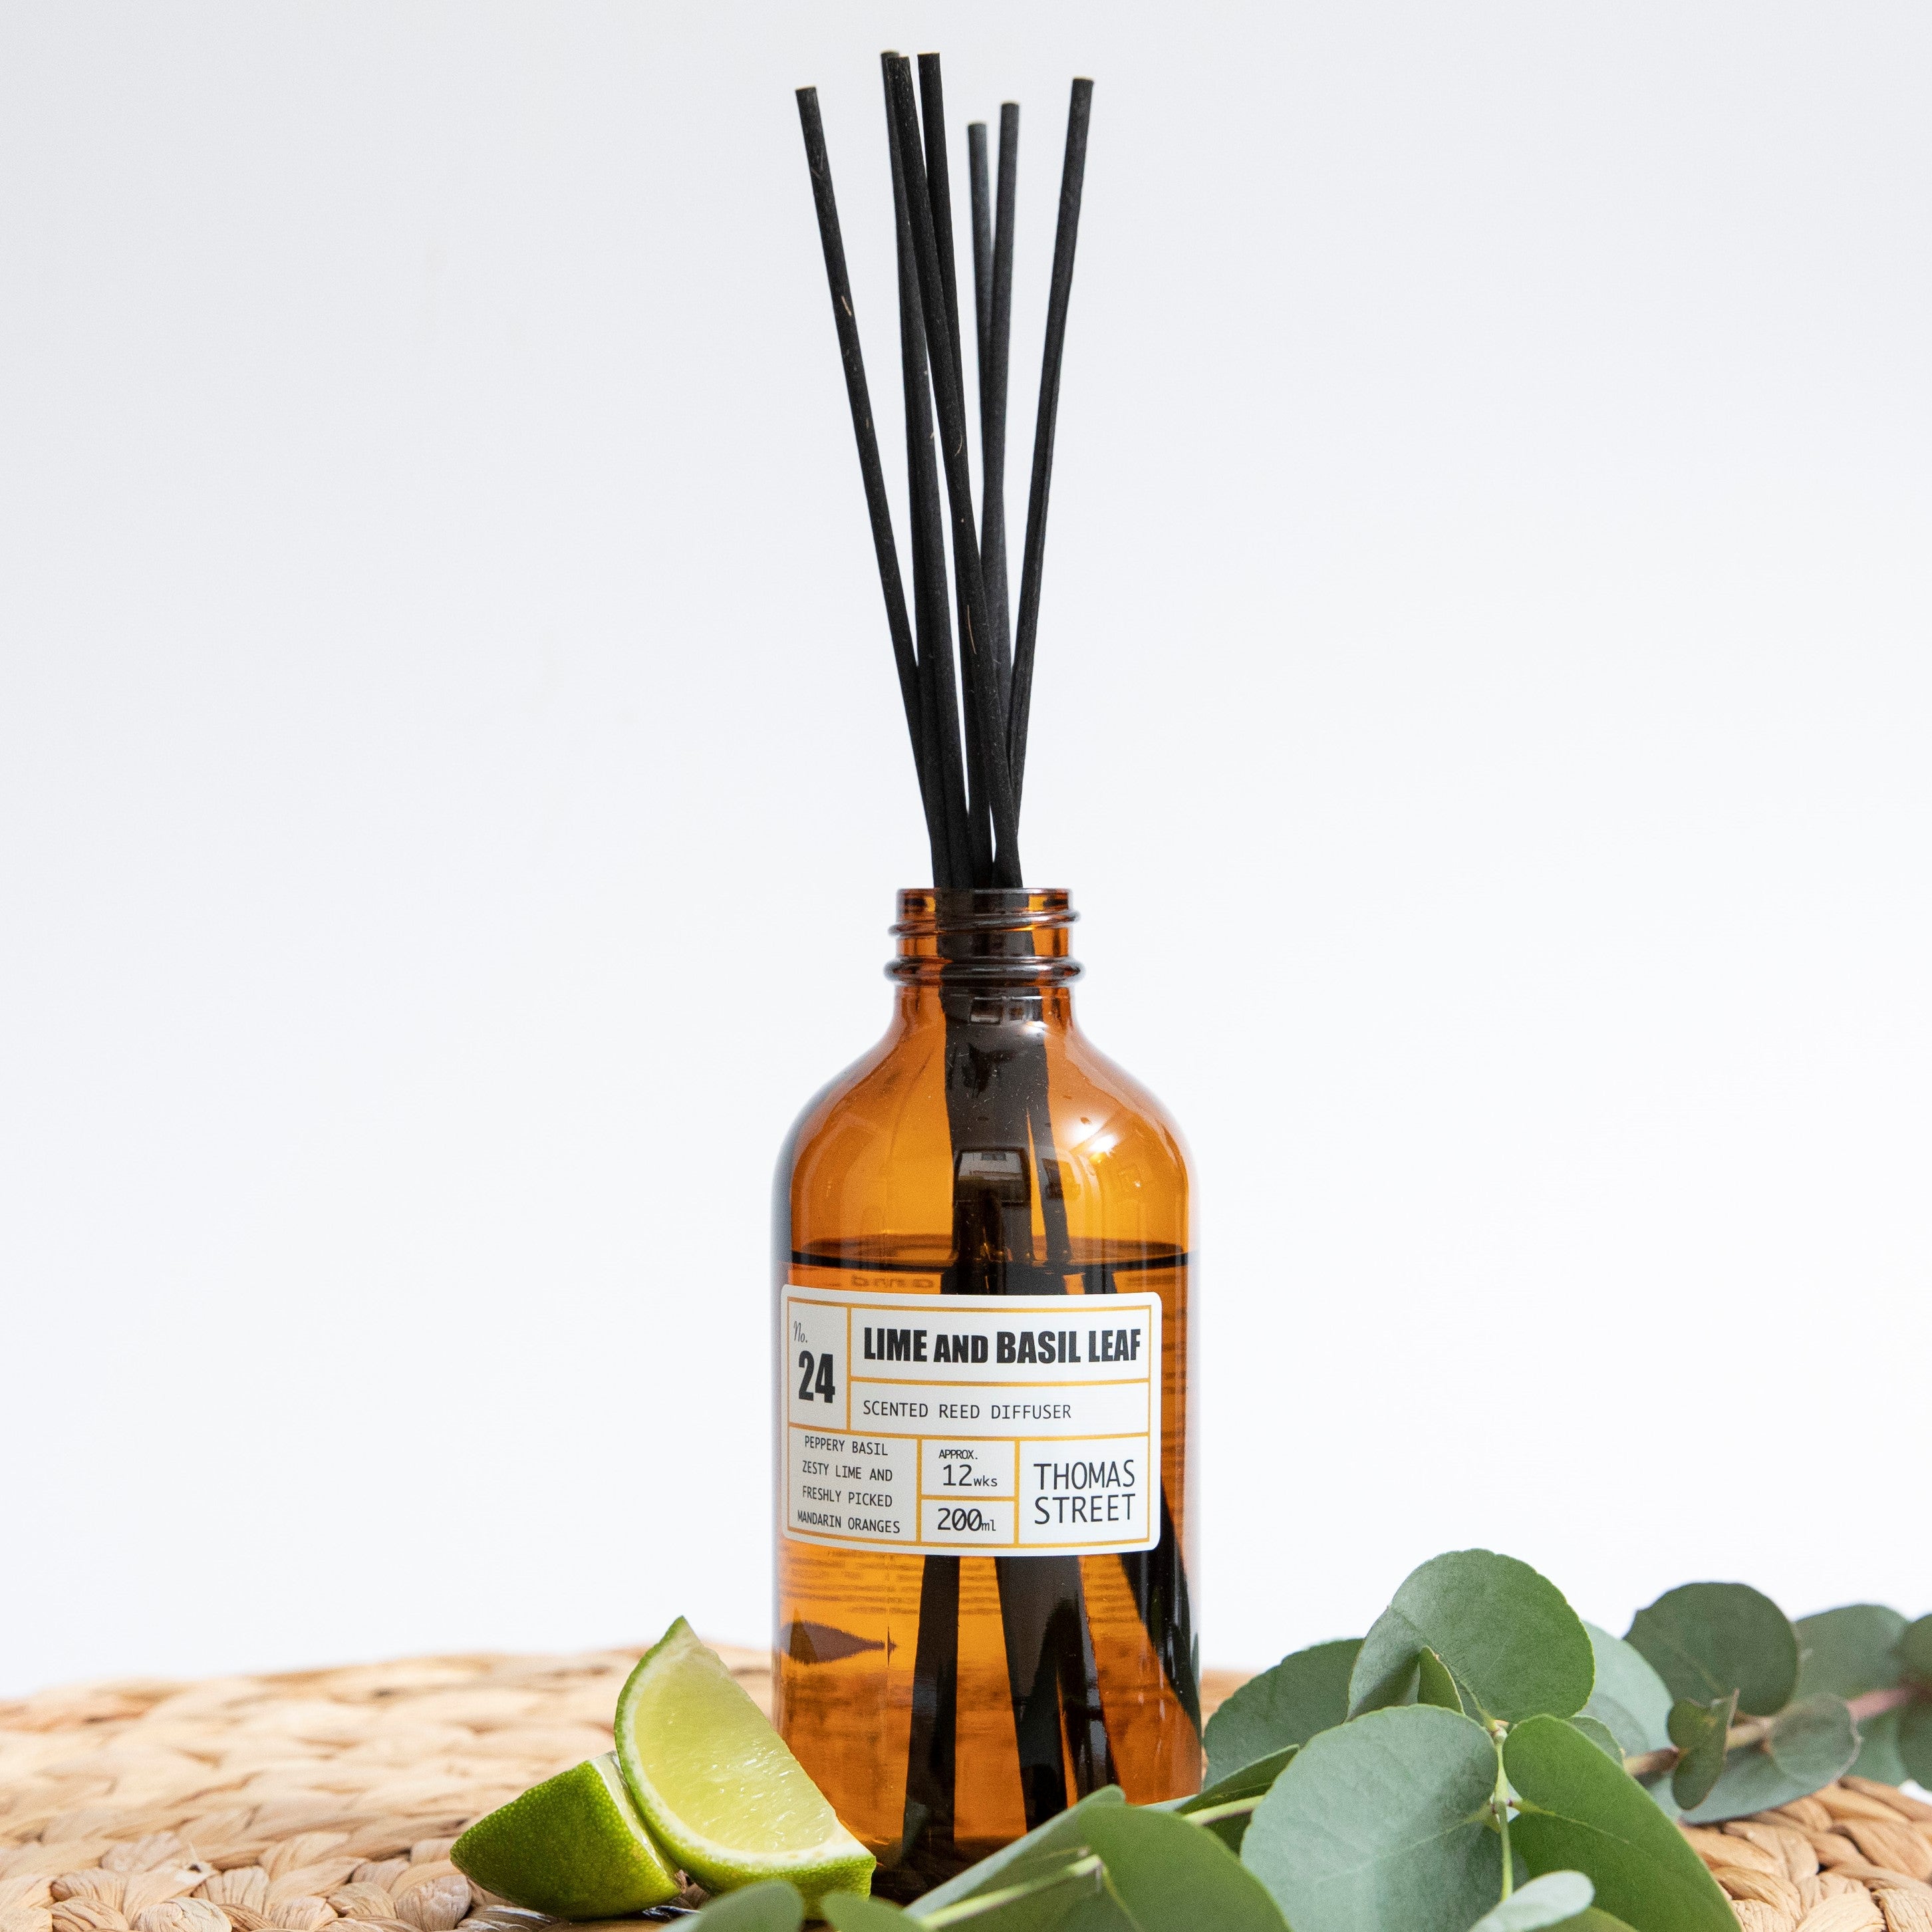 Thomas Street Lime and Basil Leaf Scented Reed 200ml Room Diffuser